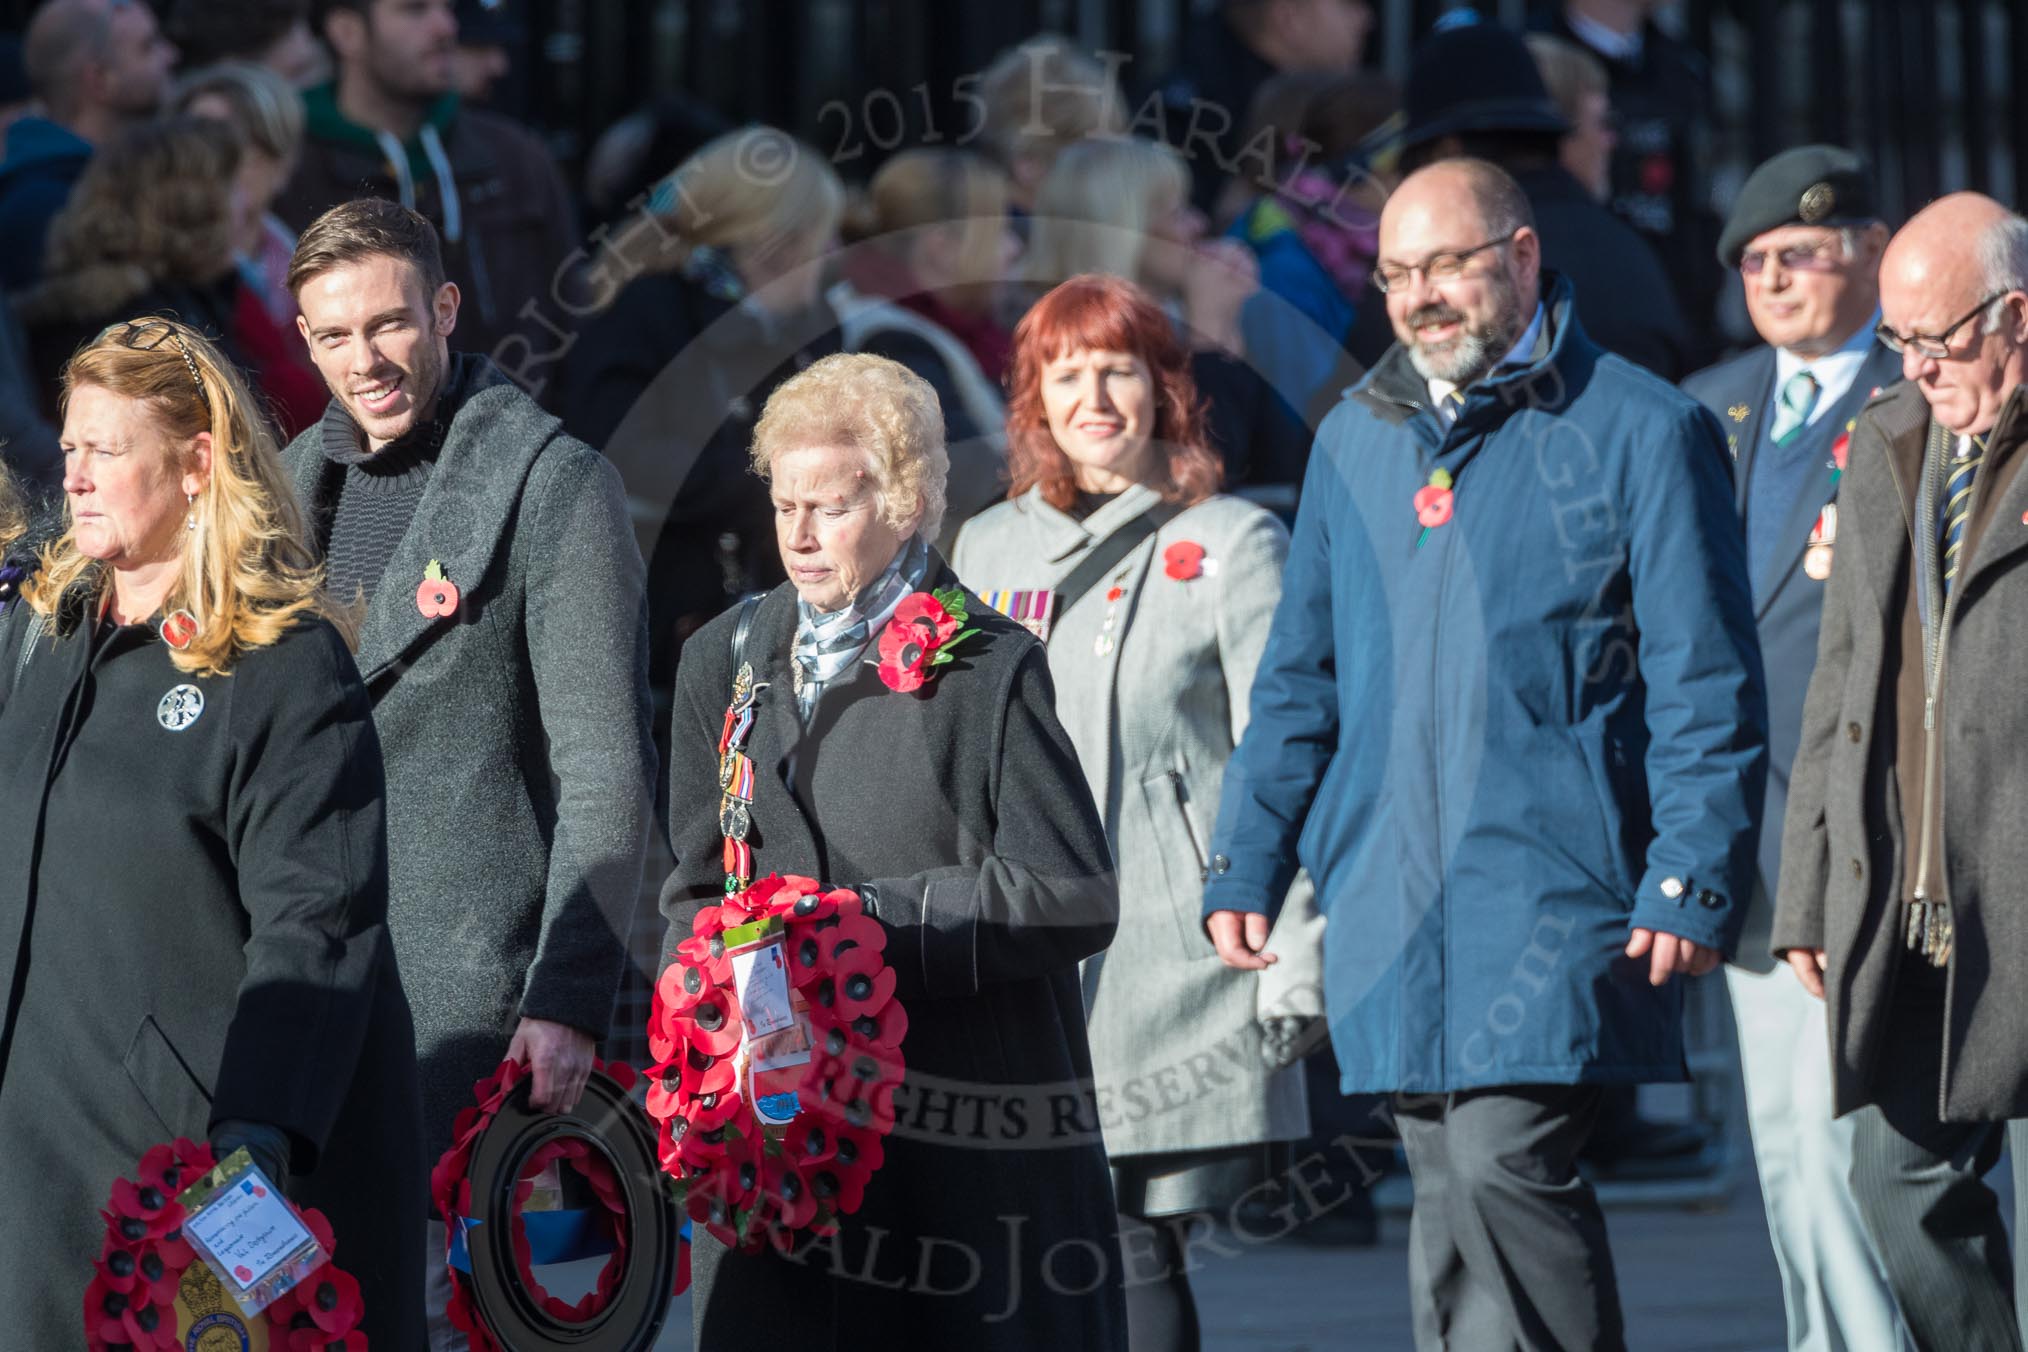 March Past, Remembrance Sunday at the Cenotaph 2016: M22 The Royal British Legion - Civilians.
Cenotaph, Whitehall, London SW1,
London,
Greater London,
United Kingdom,
on 13 November 2016 at 13:16, image #2686